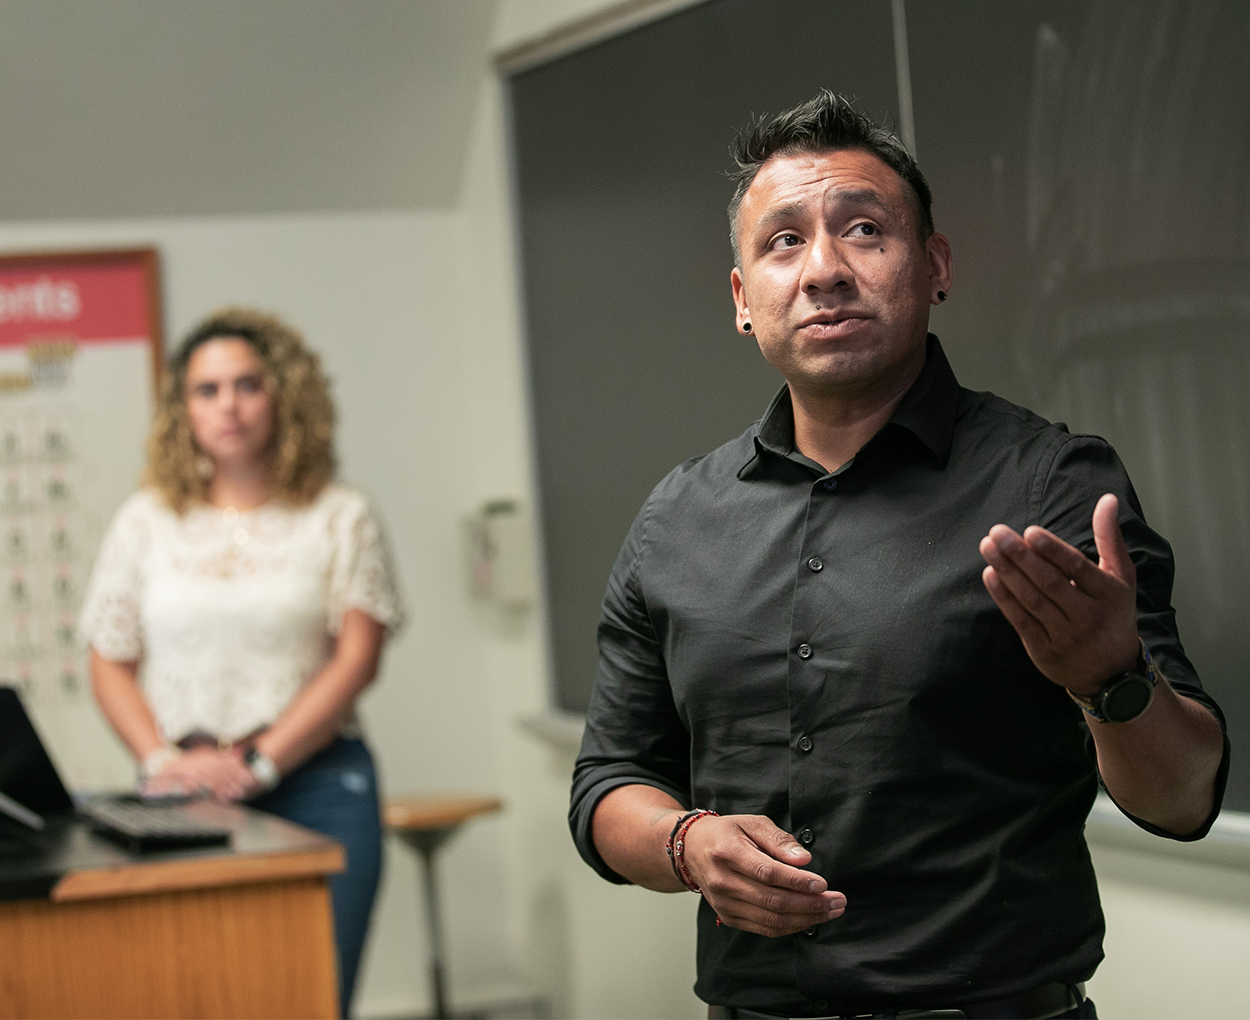 An adult in a black dress shirt speaks at a chalkboard while another adult standing at a desk with a computer looks on in the distance.